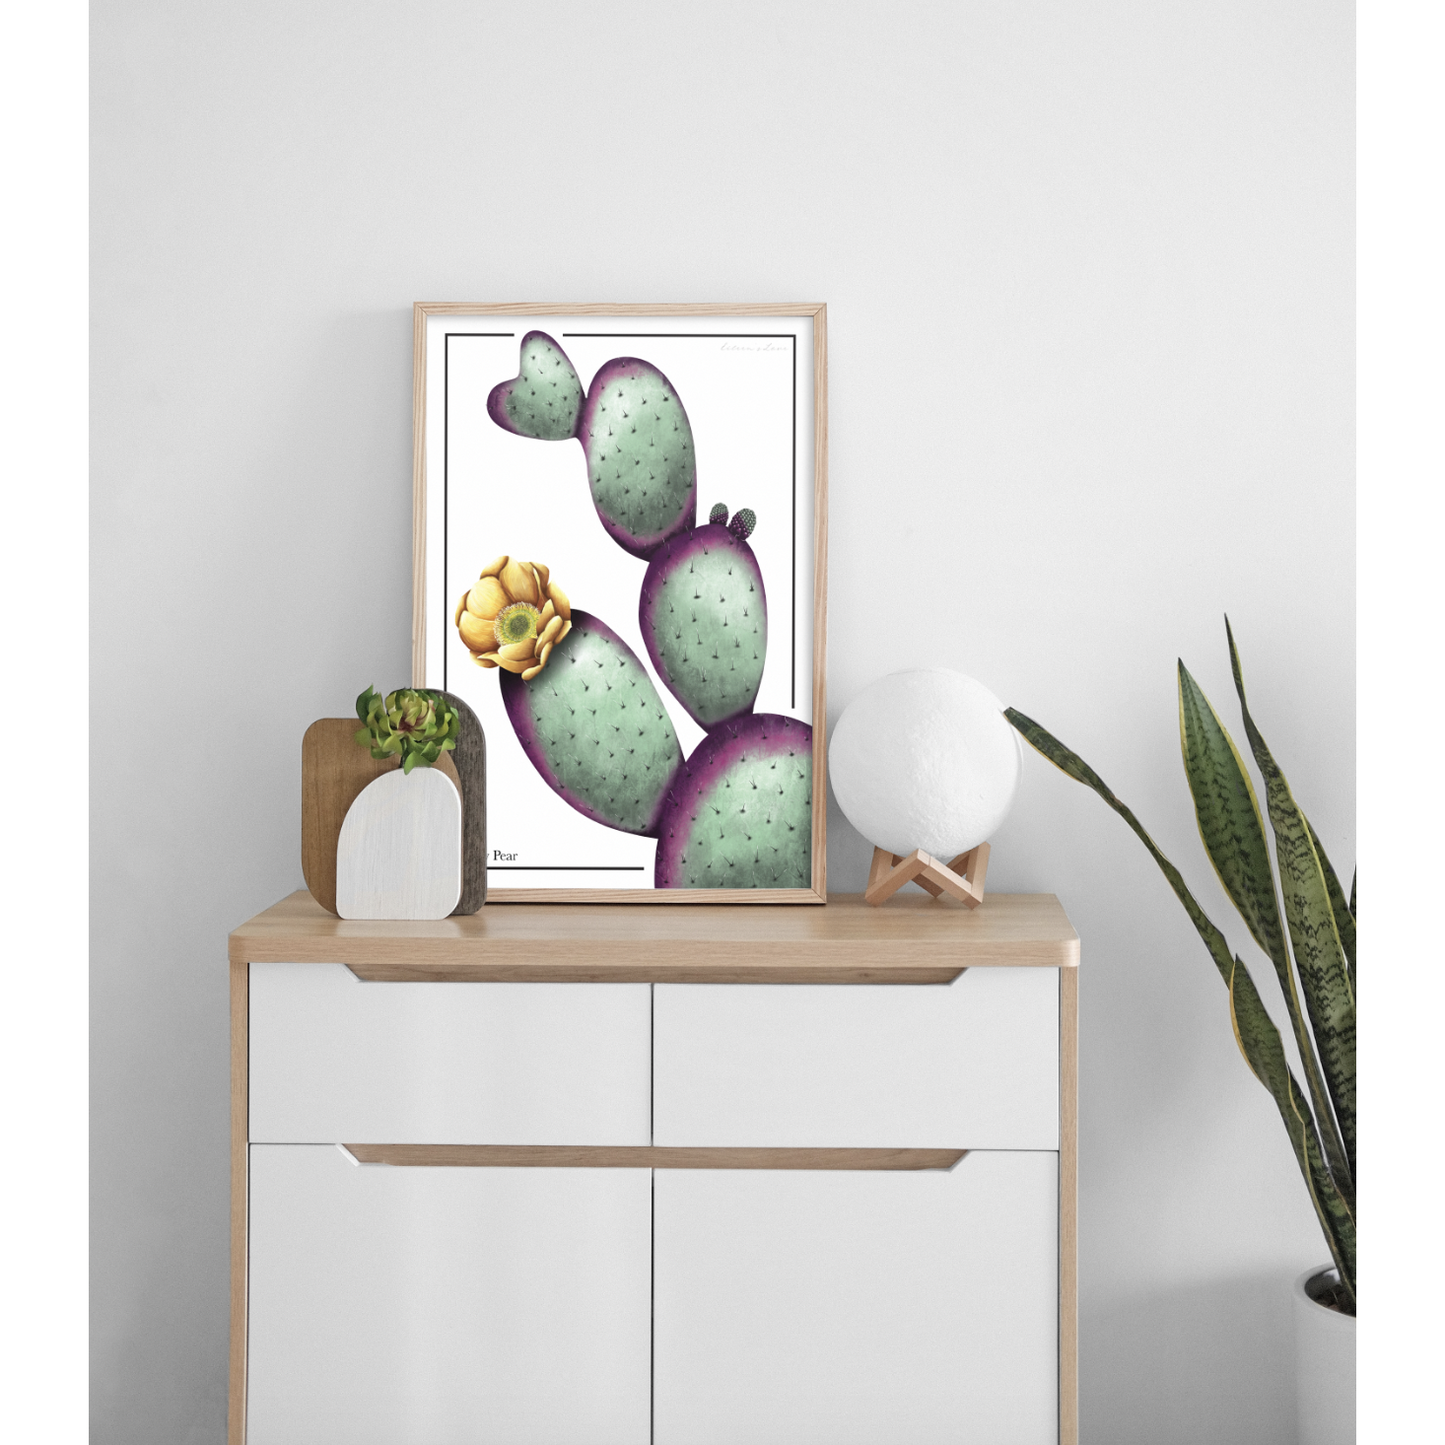 Prickly Pear Cactus - Luxe Foliage